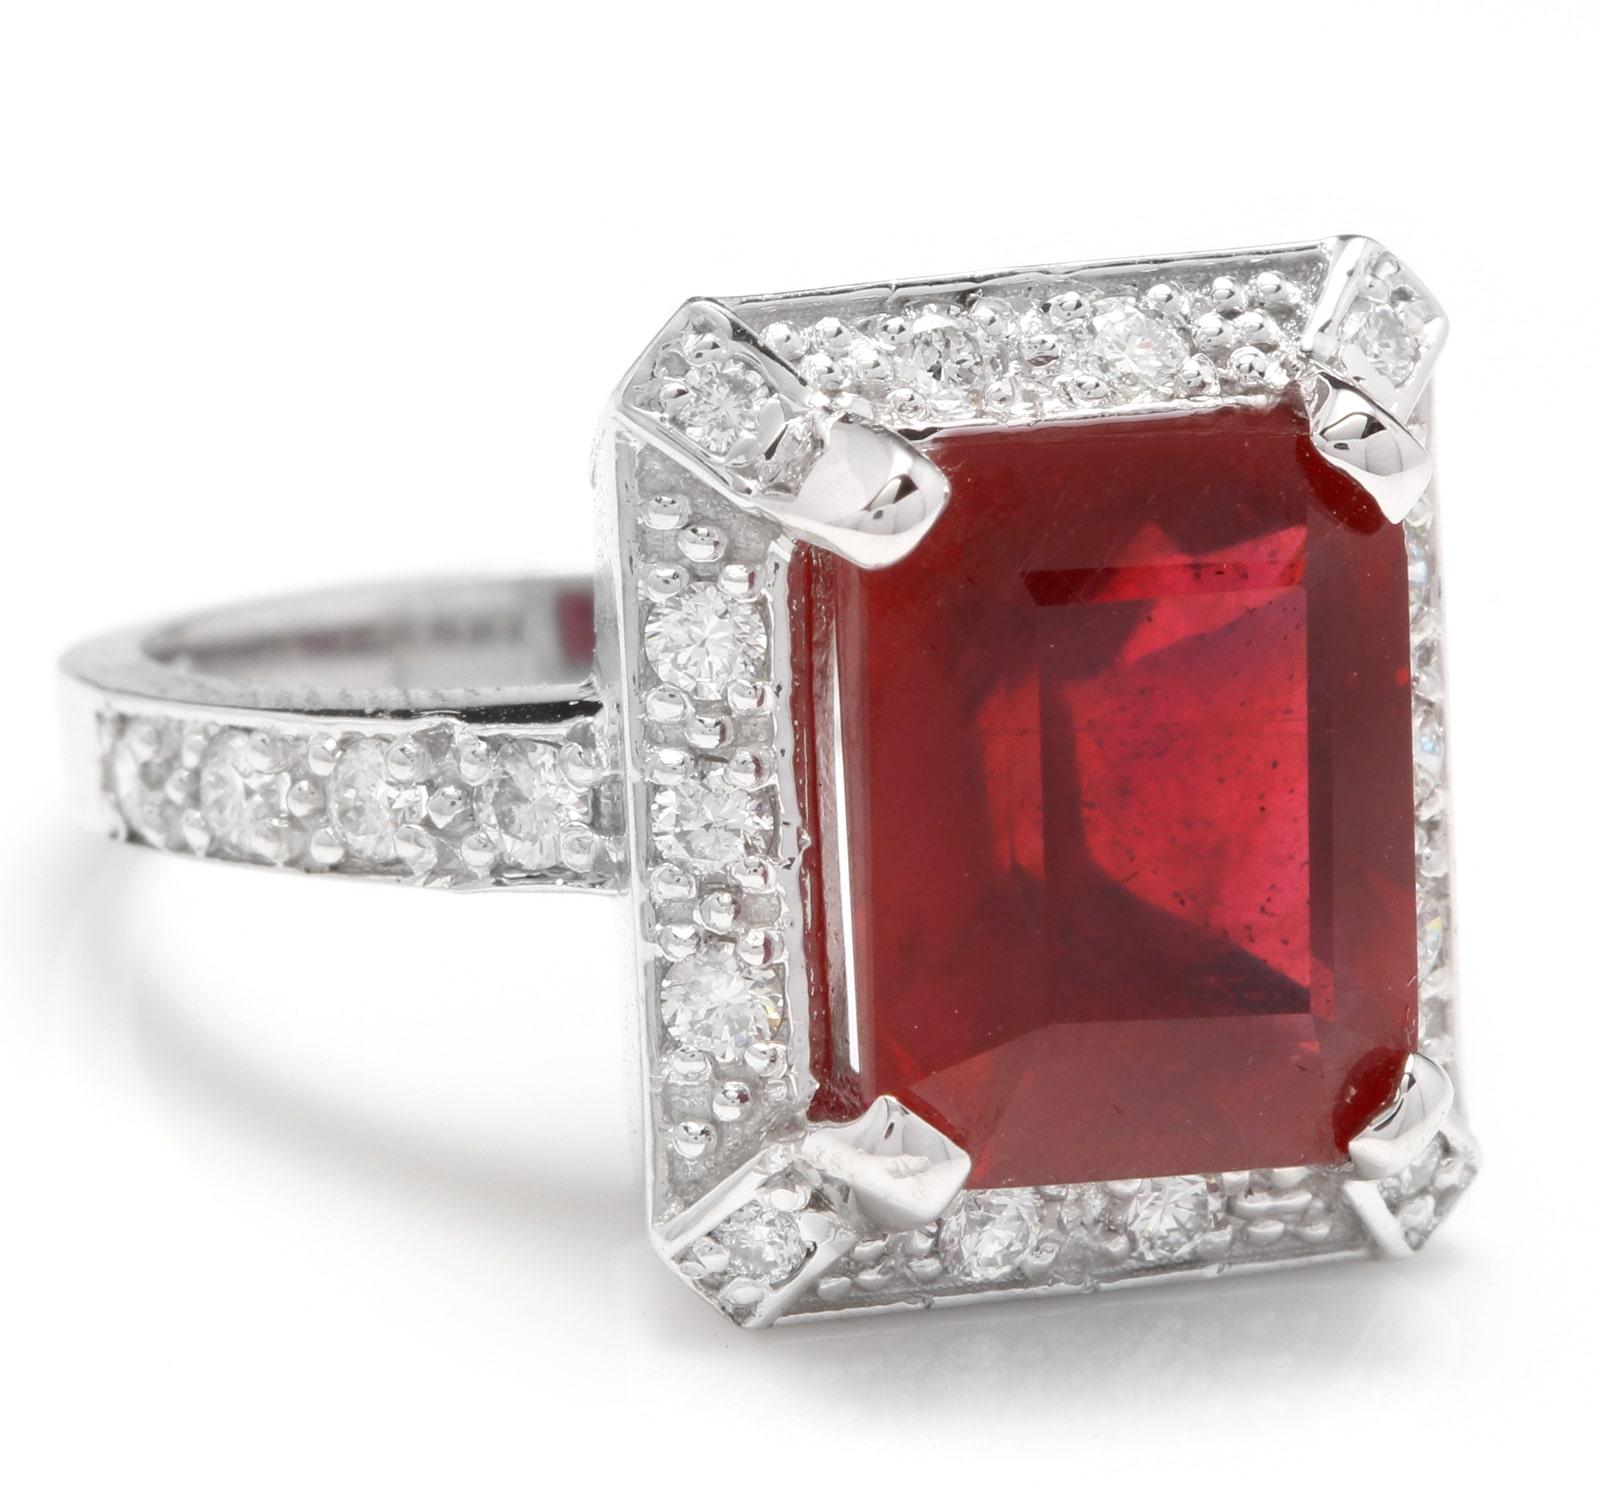 8.05 Carats Impressive Natural Red Ruby and Diamond 14K White Gold Ring

Total Red Ruby Weight is Approx. 7.50 Carats

Ruby Measures: Approx. 11.00 x 9.00mm

Ruby Treatment: Lead Glass Filling

Natural Round Diamonds Weight: Approx. 0.55 Carats